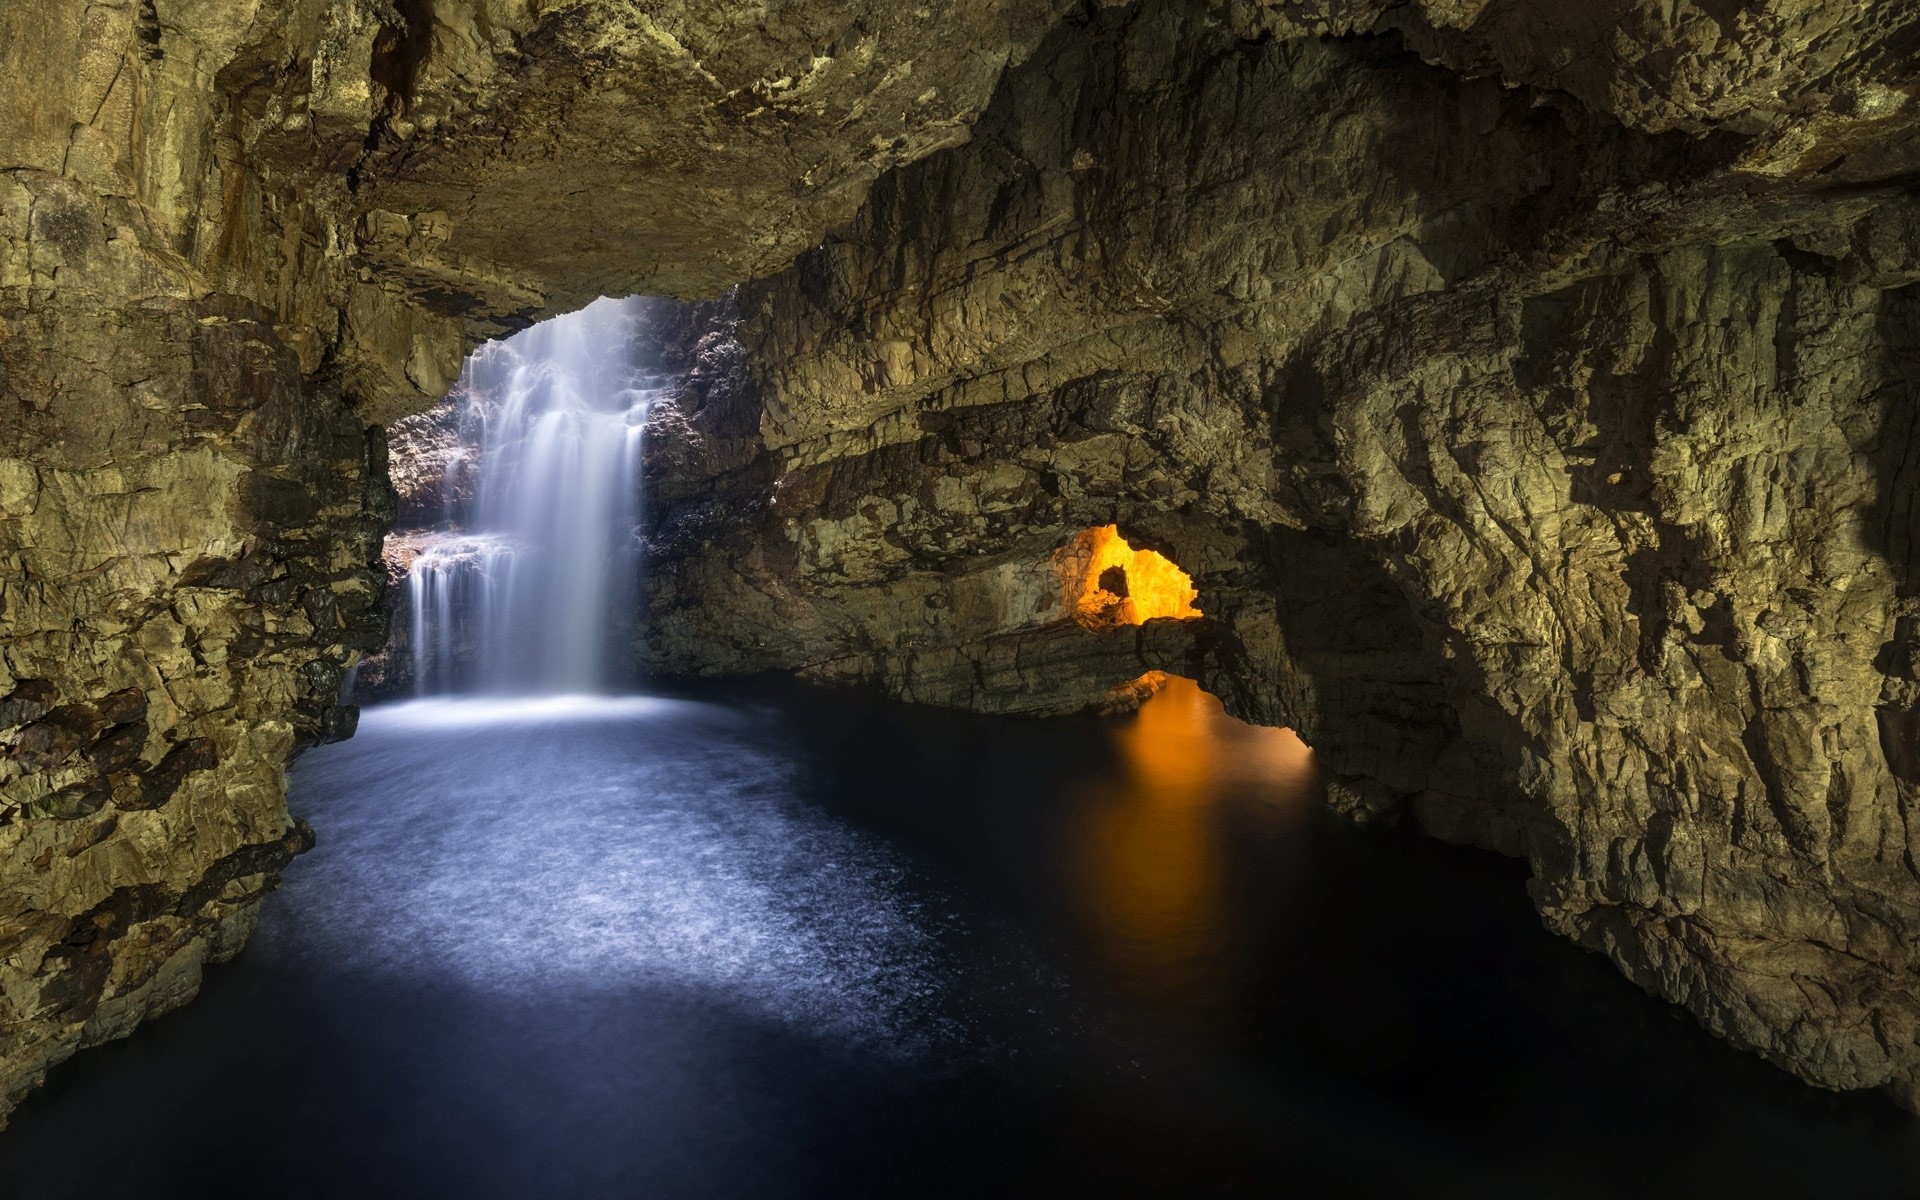 Waterfall in a stone cave in Scotland wallpapers and images ...